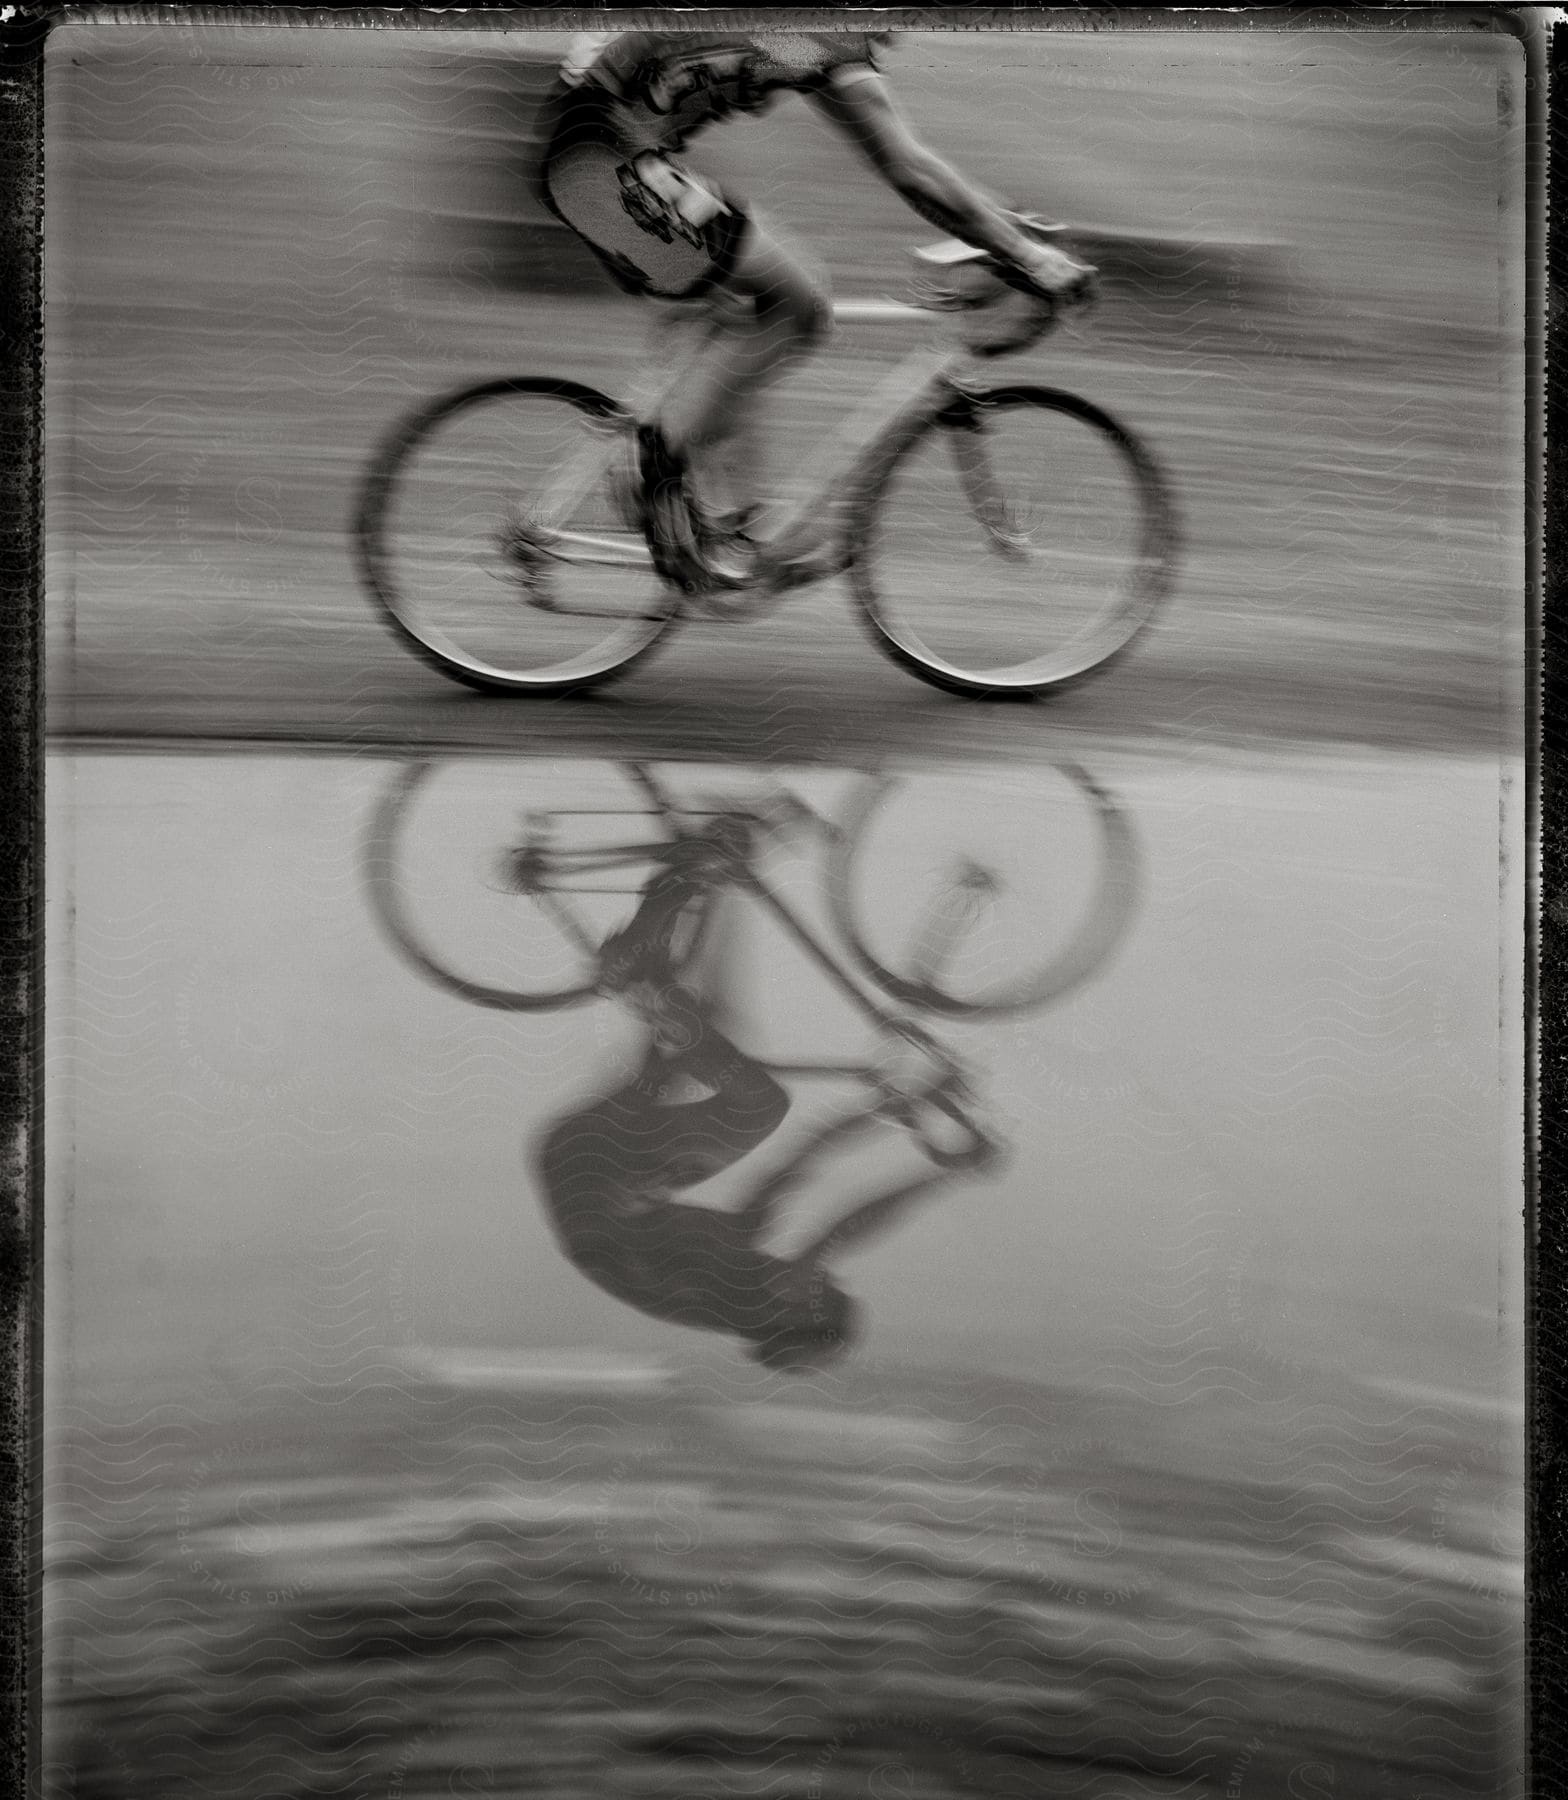 A cyclist confidently rides on the road adjacent to a pool of water displaying balance and adventure